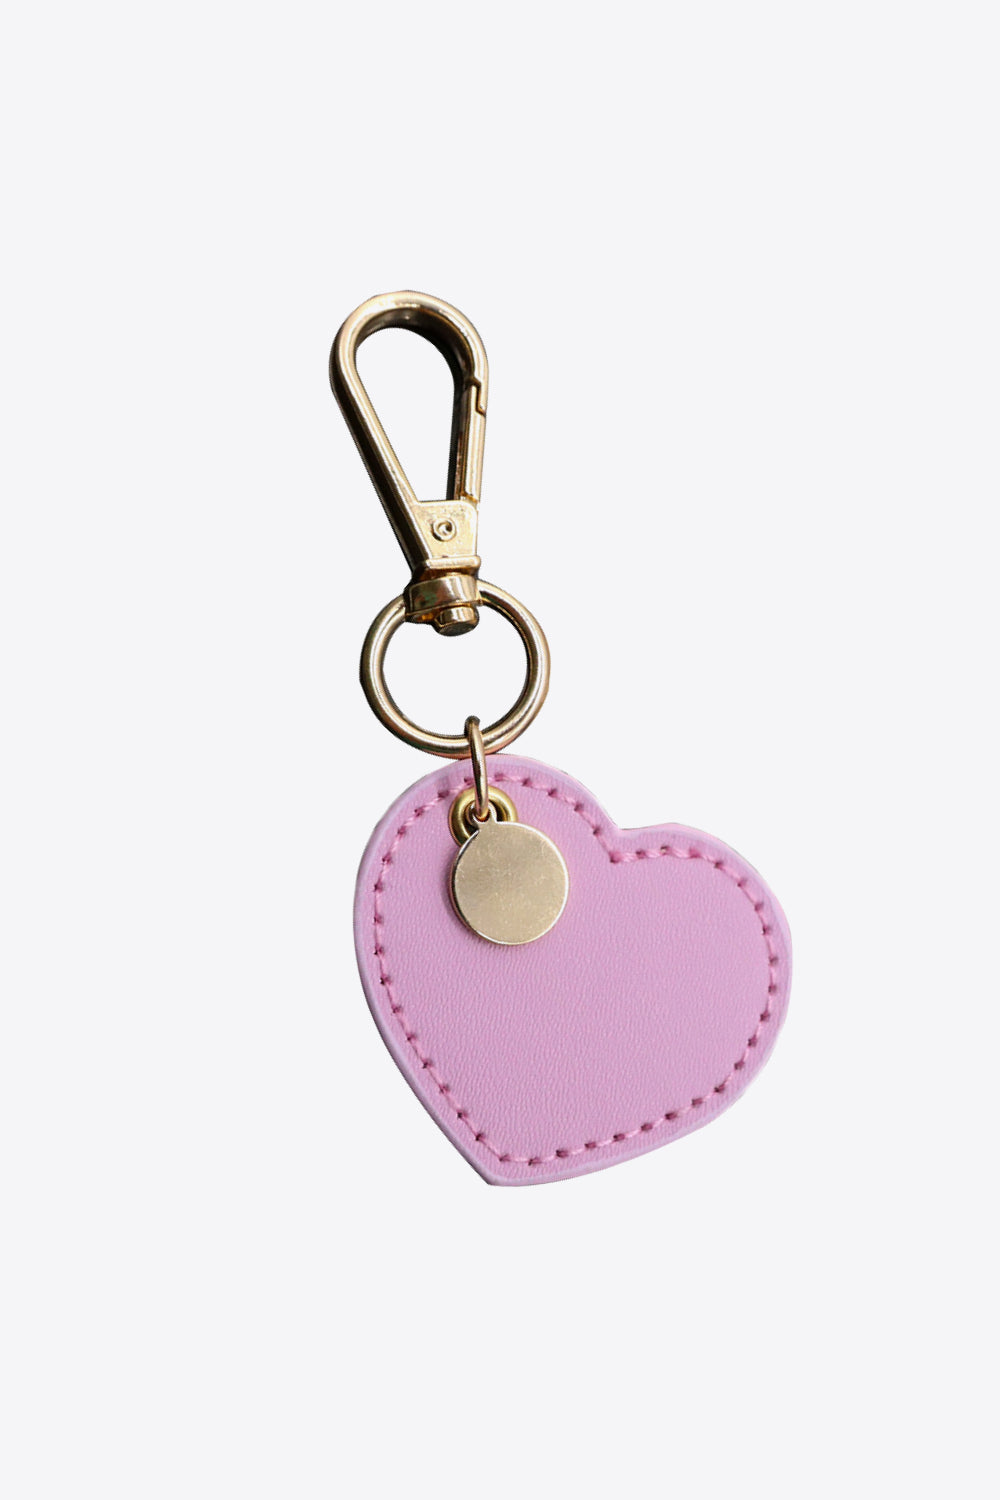 White Smoke Assorted 4-Pack Heart Shape PU Leather Keychain Sentient Beauty Fashions Apparel &amp; Accessories